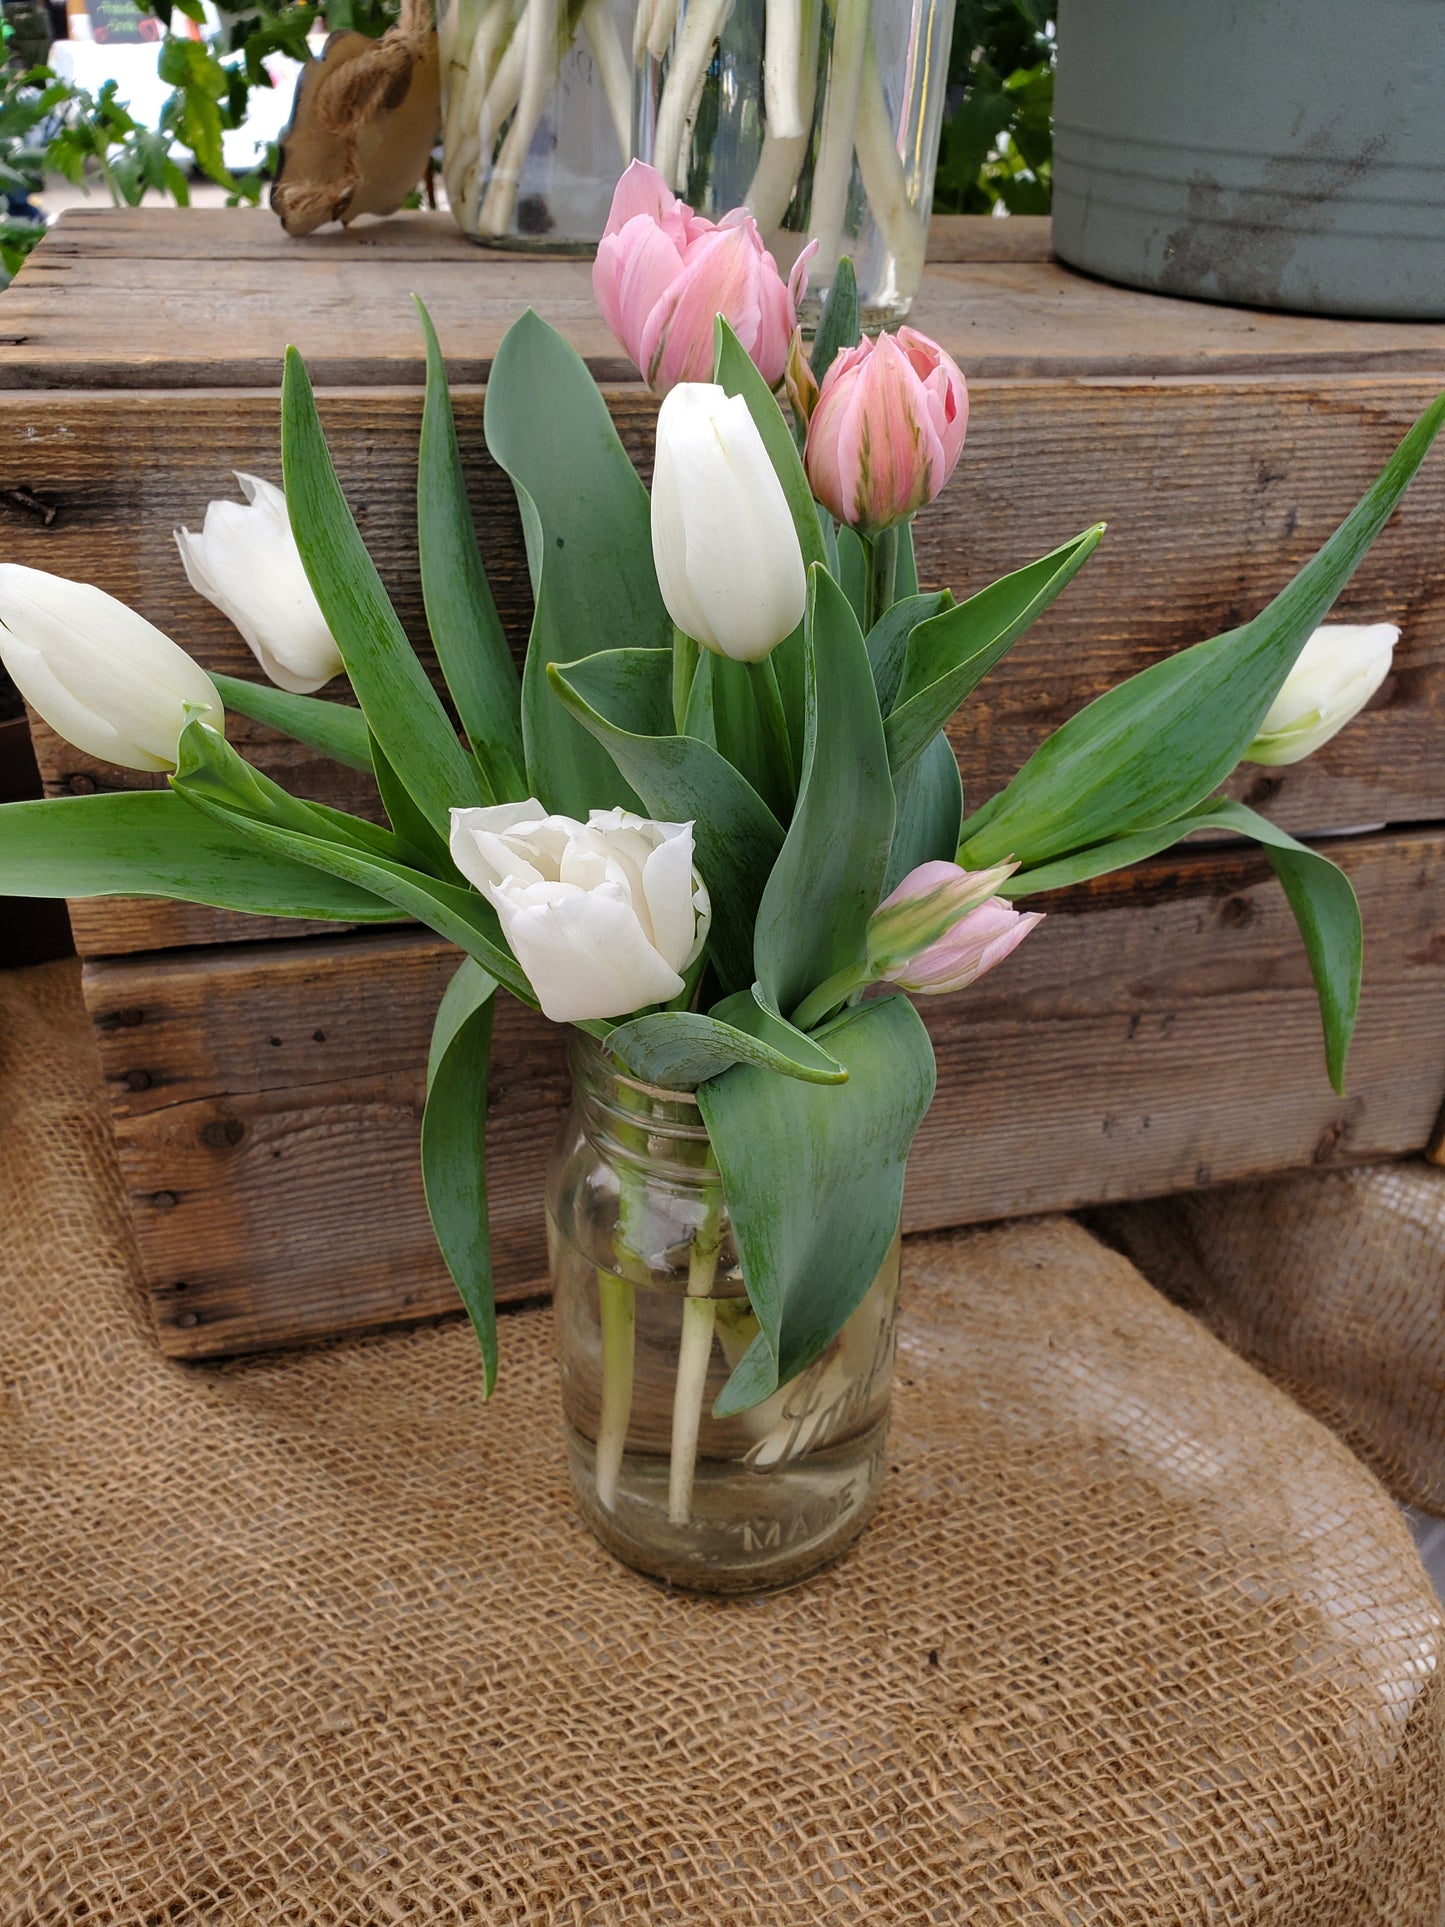 Weekly Tulip Bouquet Subscription - Fernwood & Co